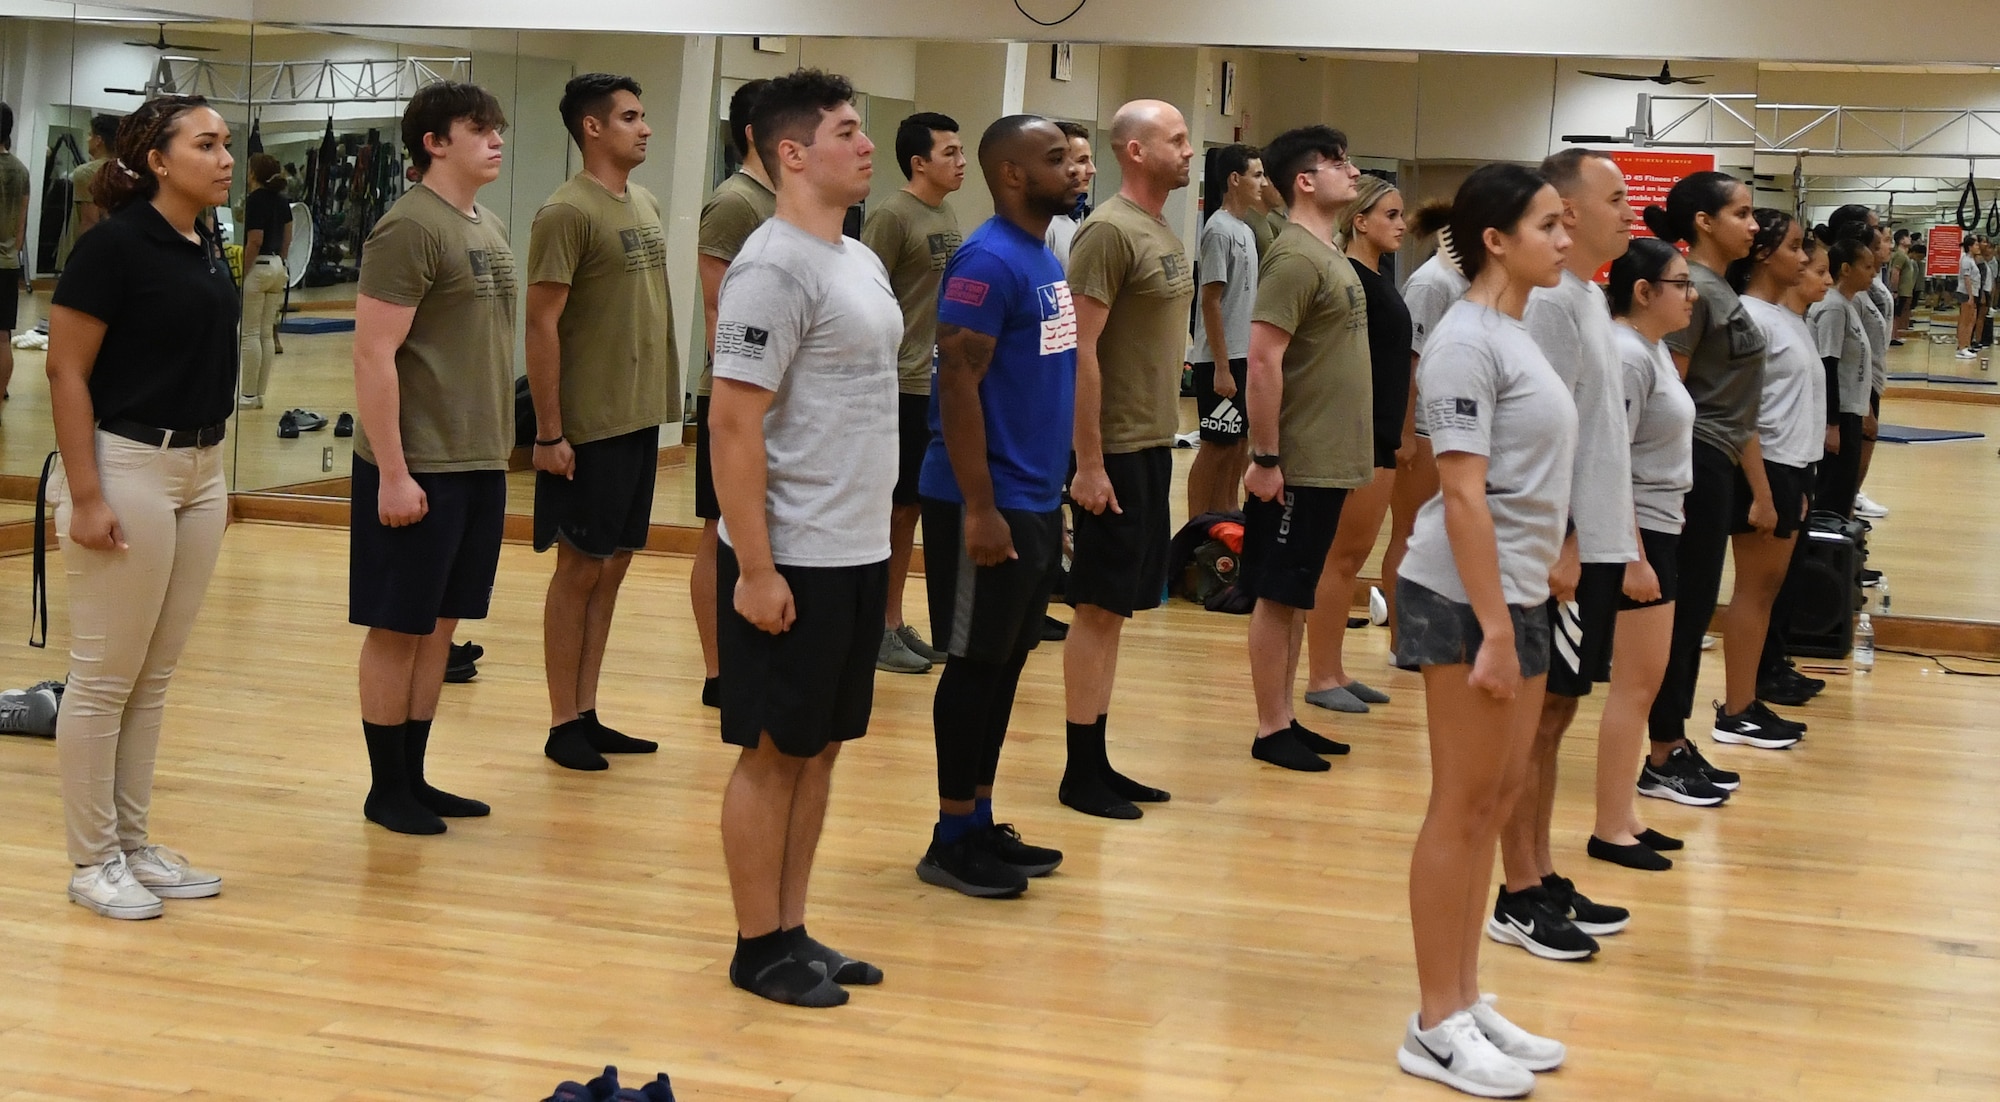 The 920th Rescue Wing Development Training Flight prepares newly-enlisted Airmen for their eight-week basic military training by teaching them skills such as basic dress and drill procedures at Patrick Space Force Base, Fla, April 3, 2022.